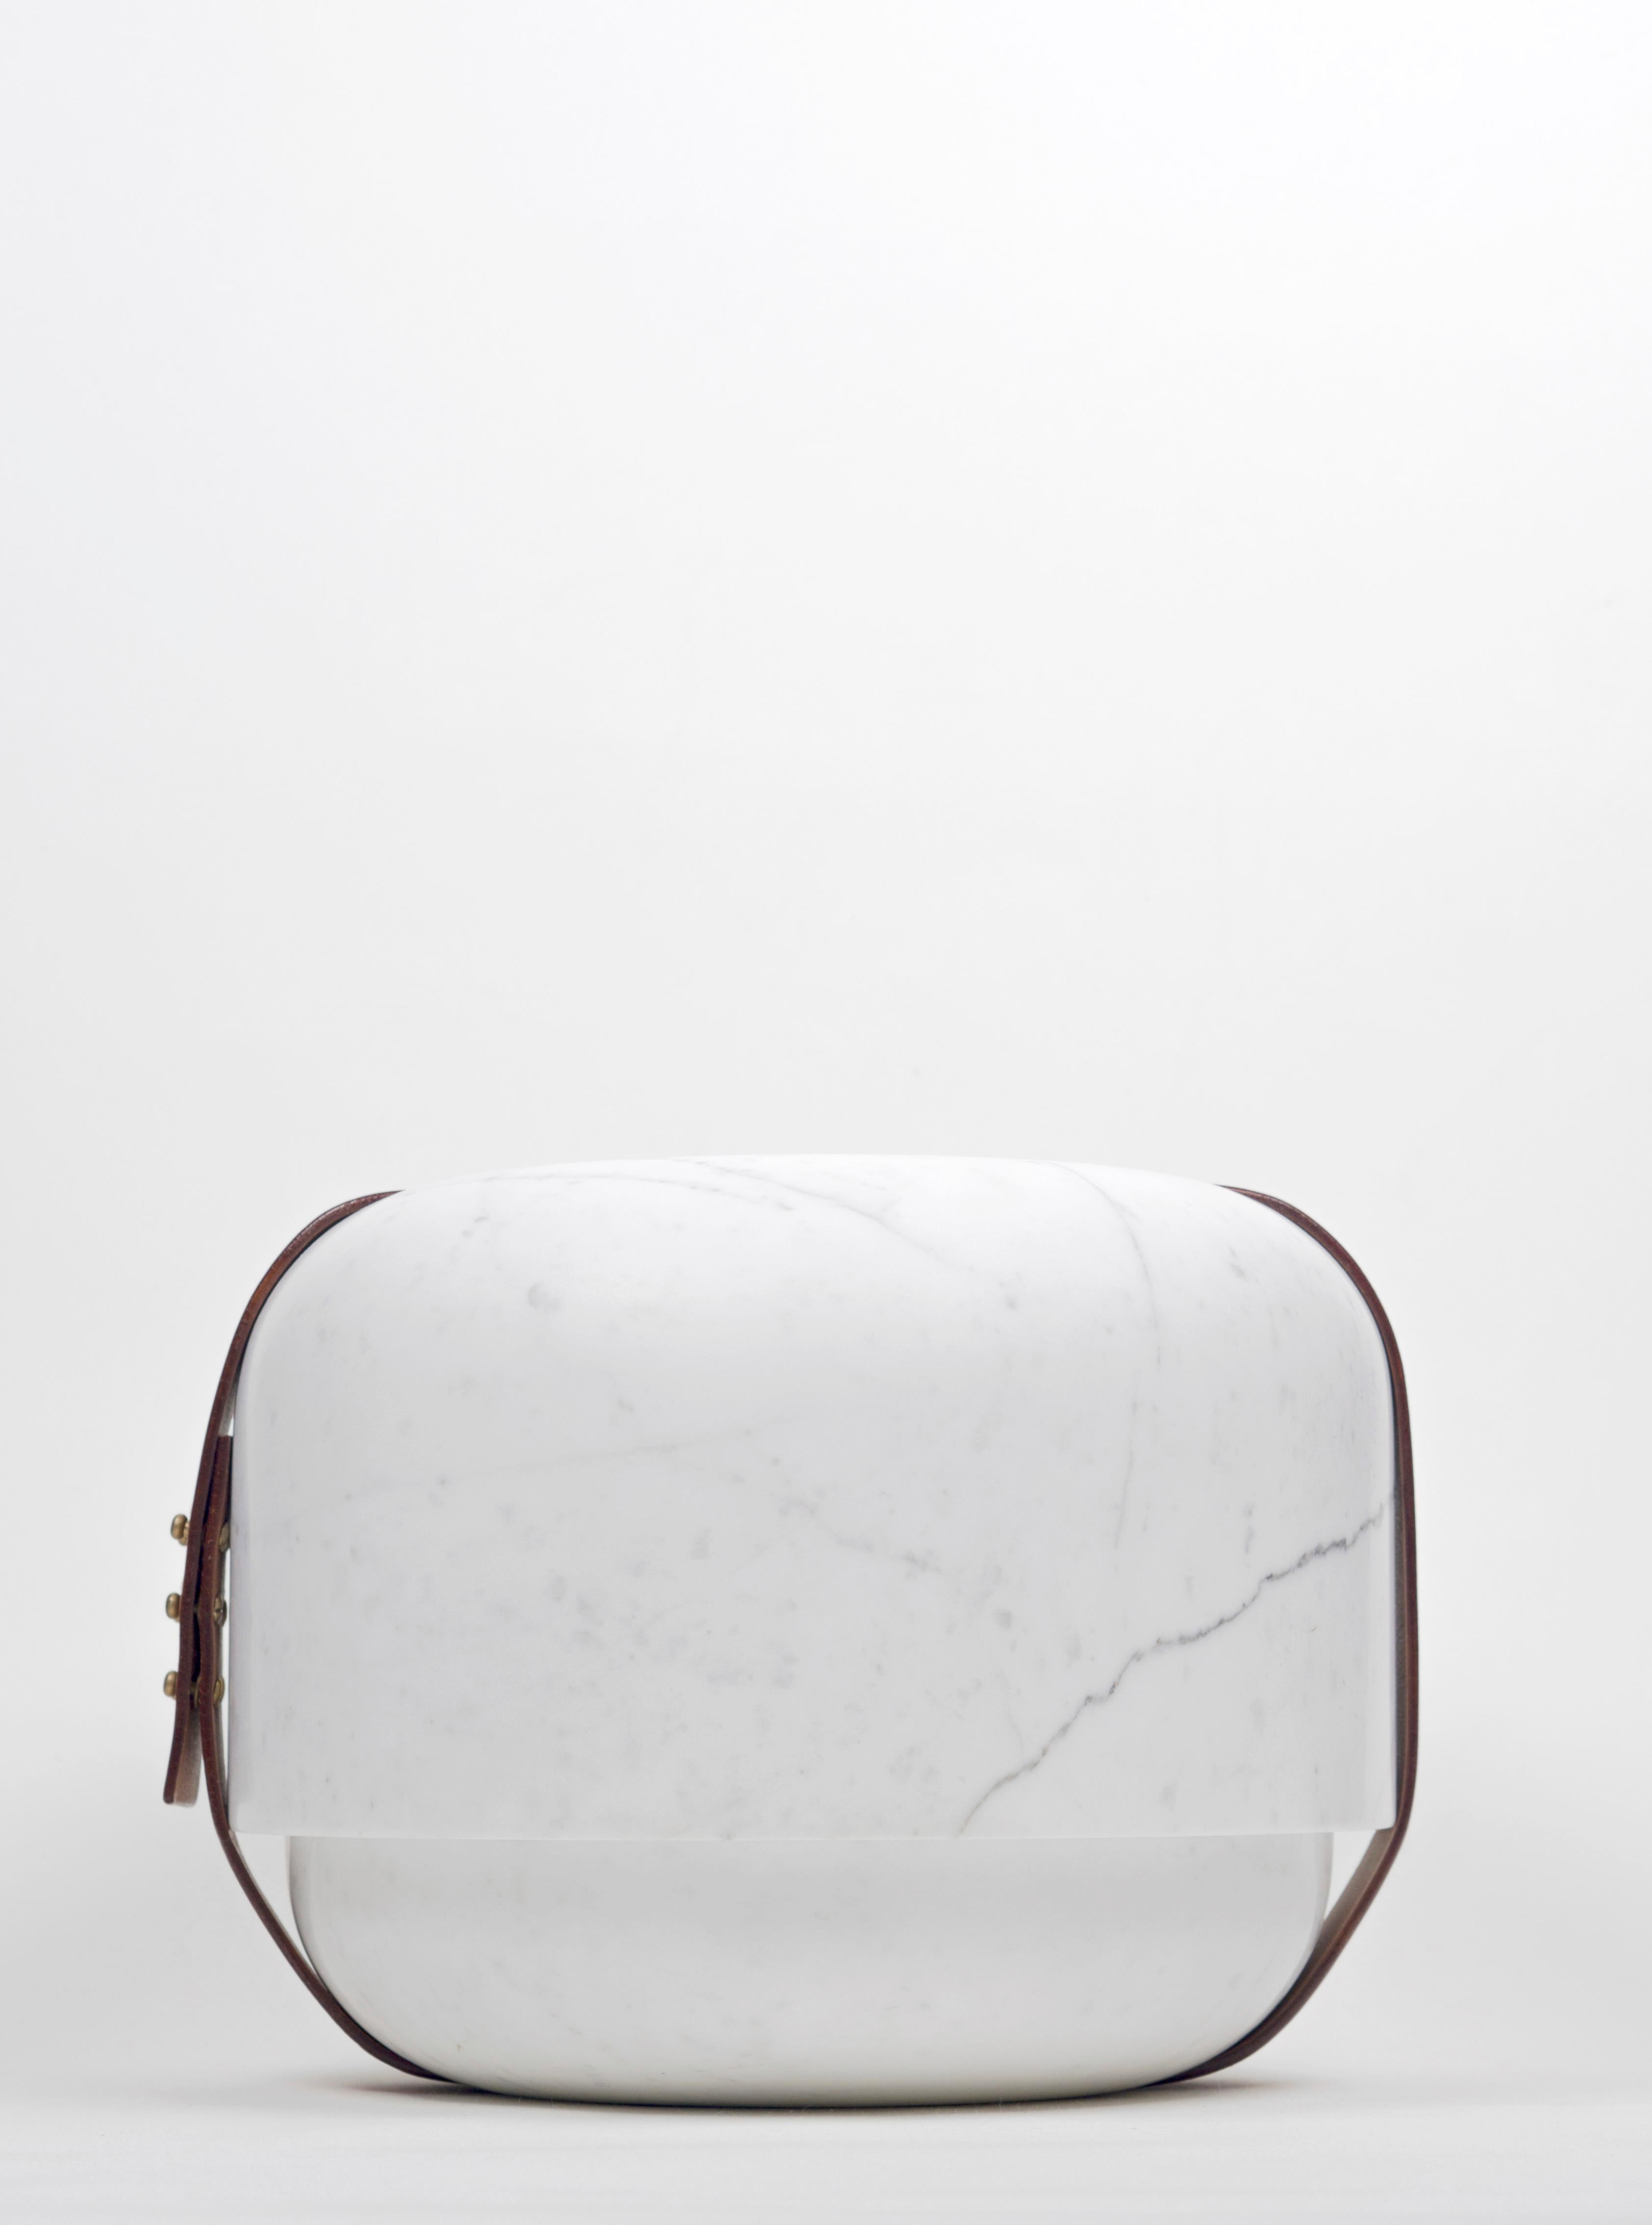 Istanti Inclusi, Contemporary Storage or Sculptures in Marble and Leather For Sale 3